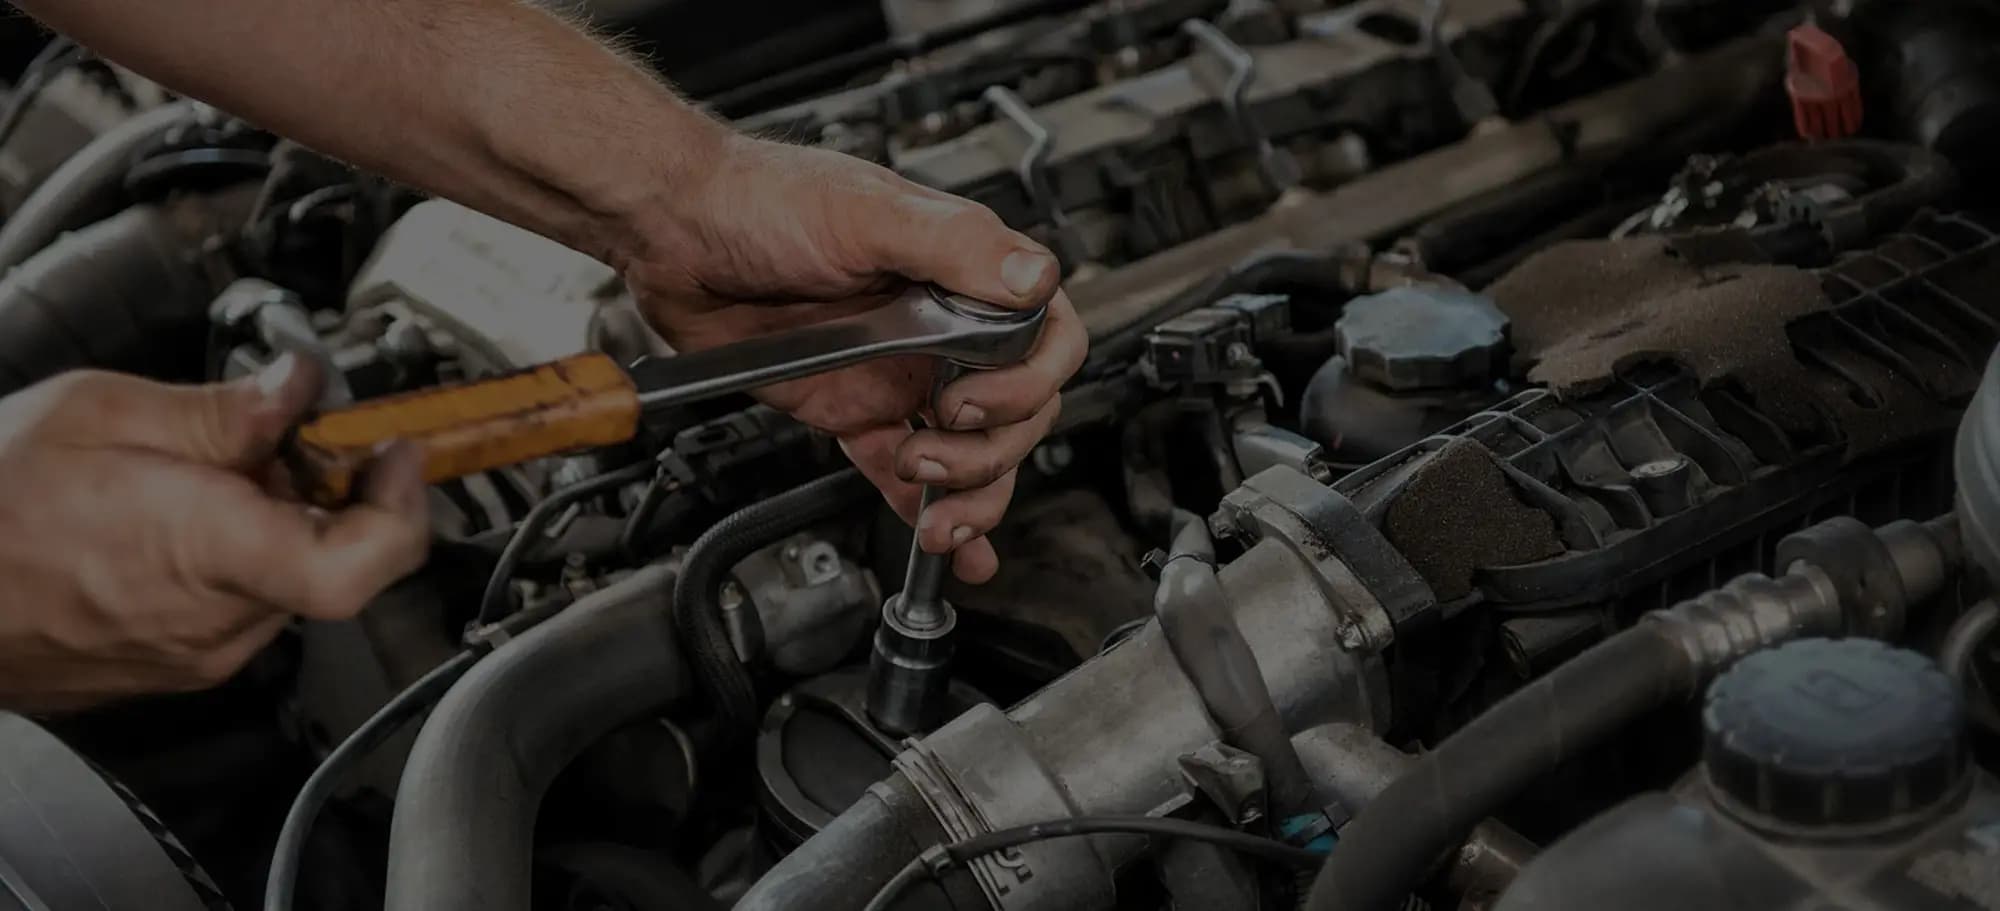 Experience The Best Car Services - Car Repair Shops Nearby